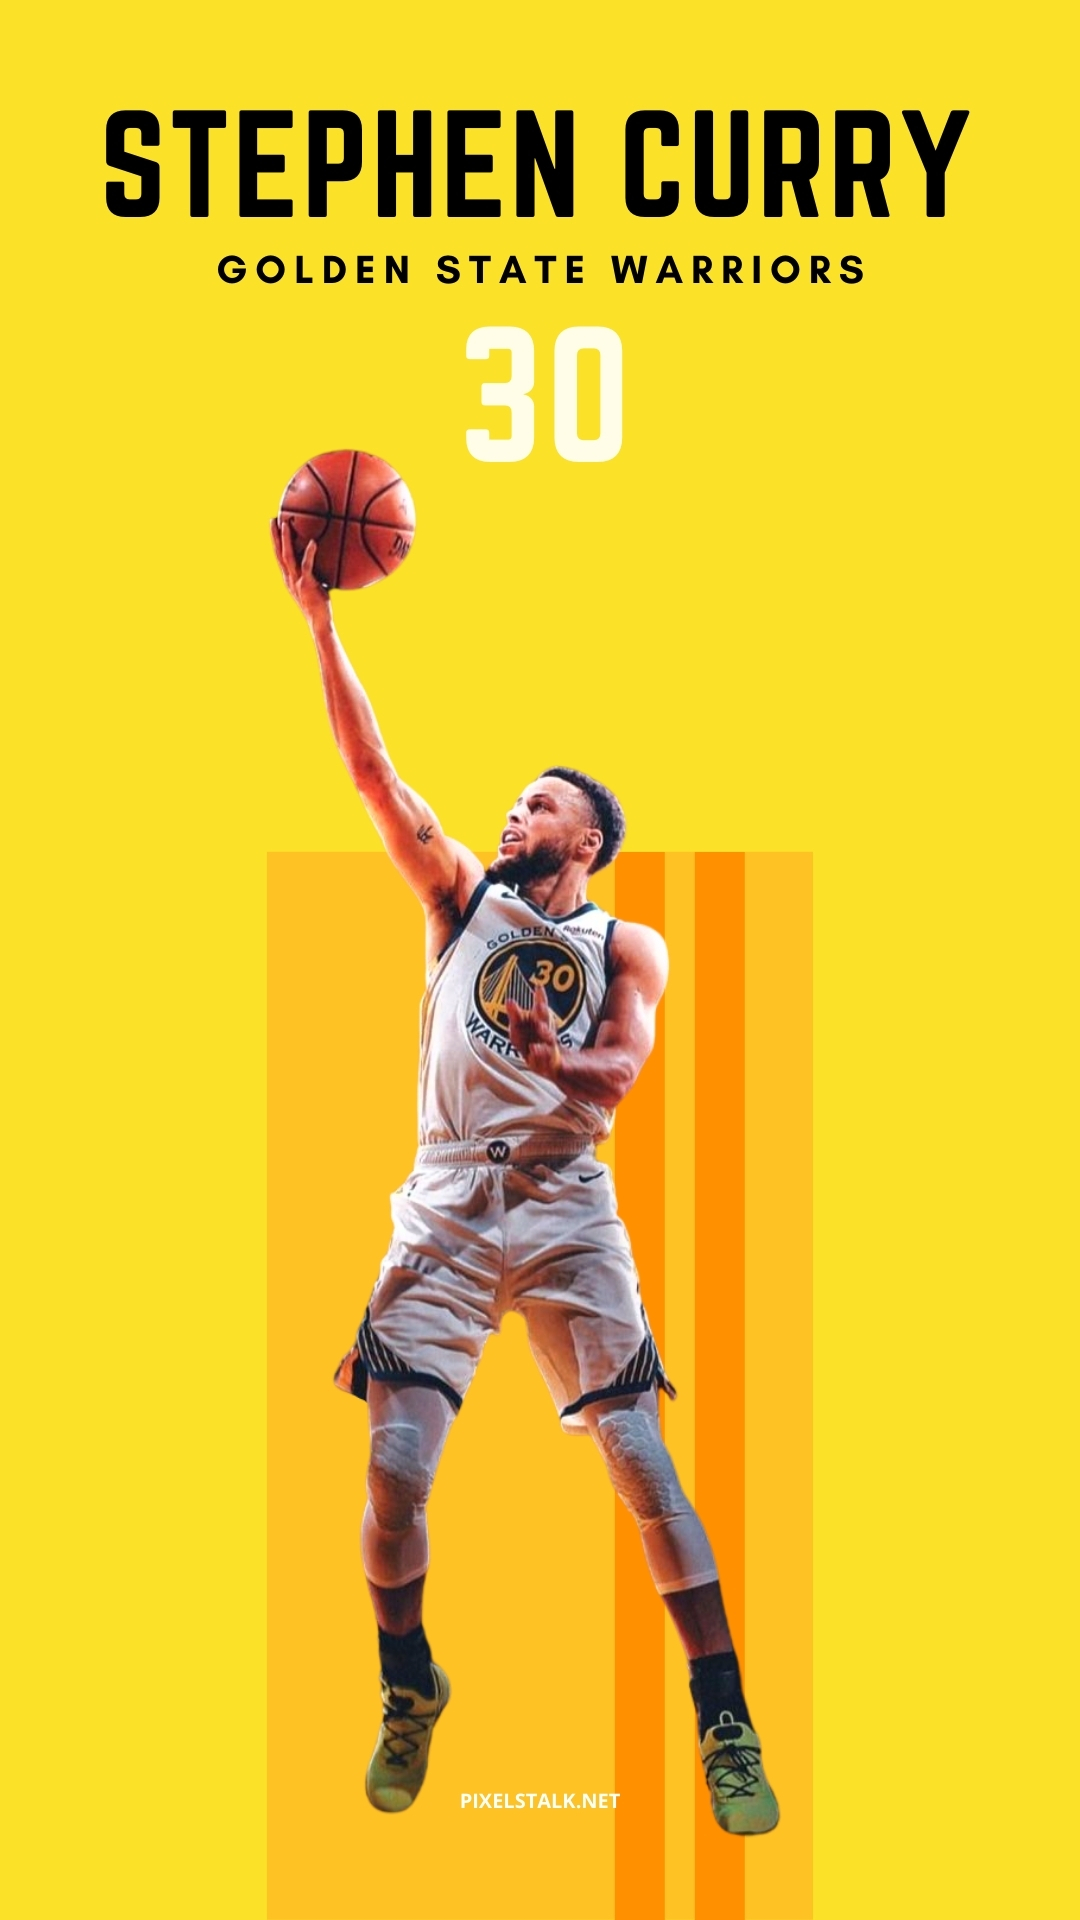 Stephen Curry and Kyrie Irving Wallpapers on WallpaperDog